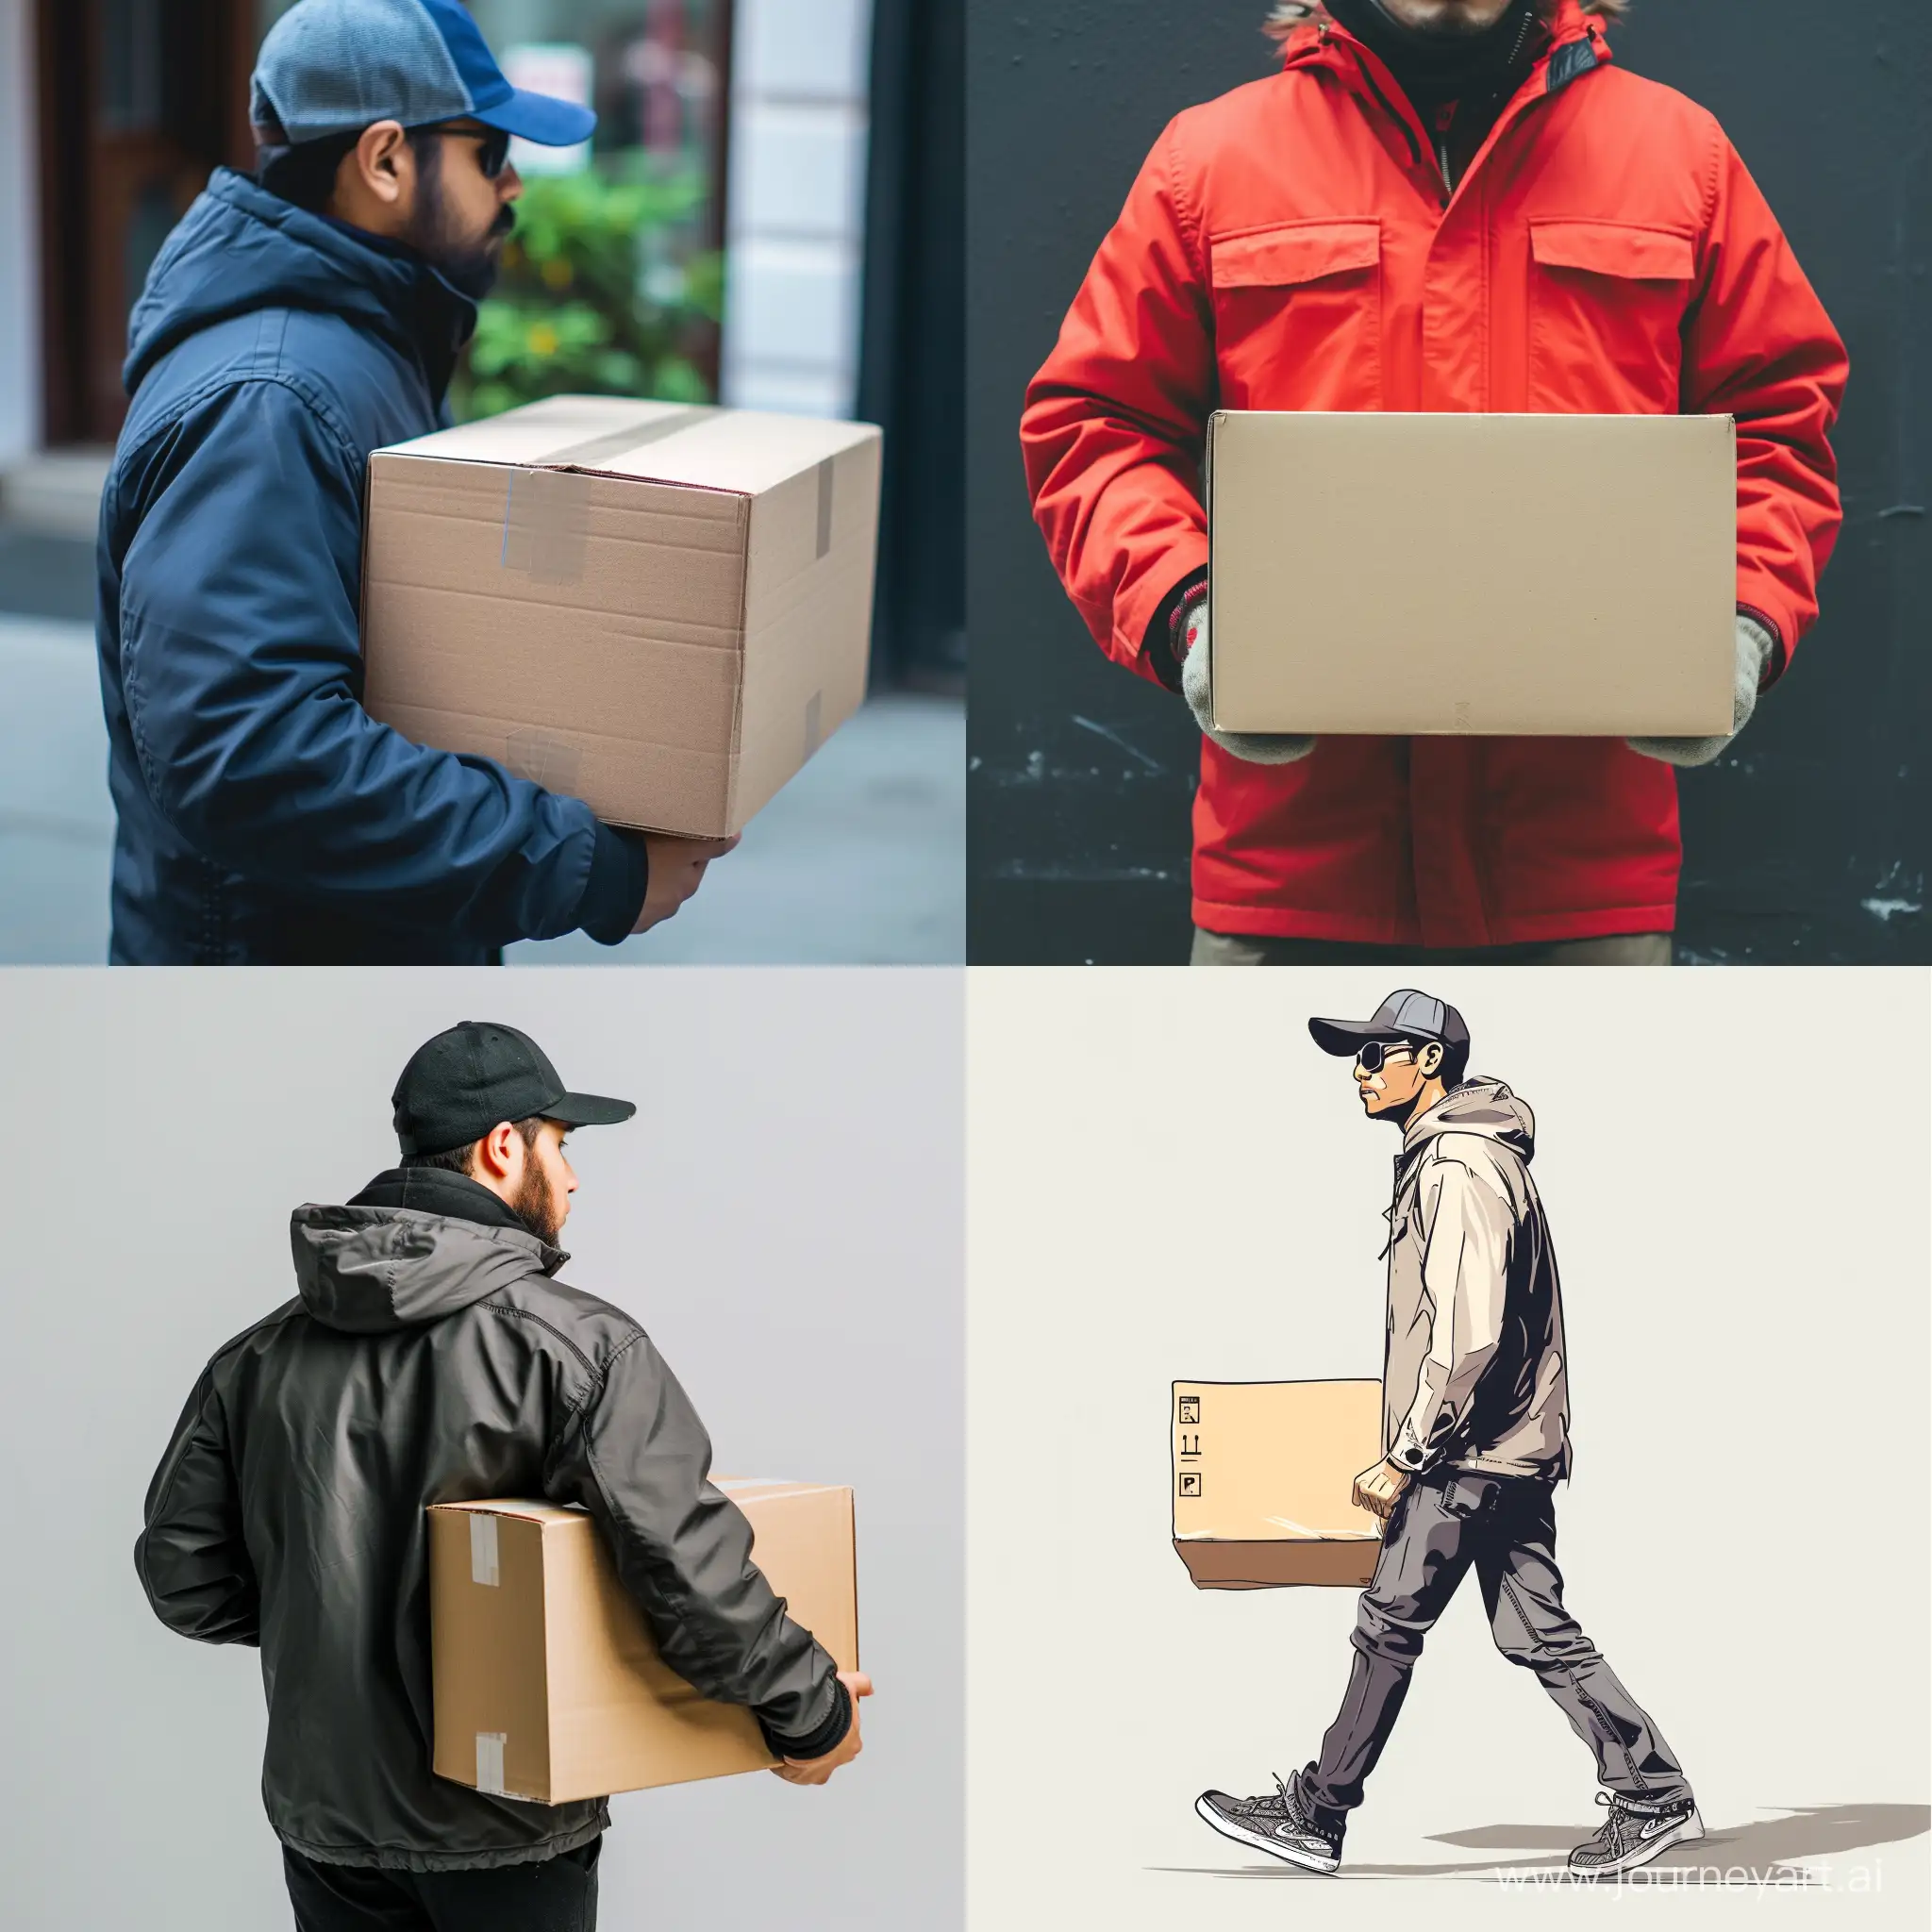 Courier-Carrying-Box-Delivery-Service-Concept